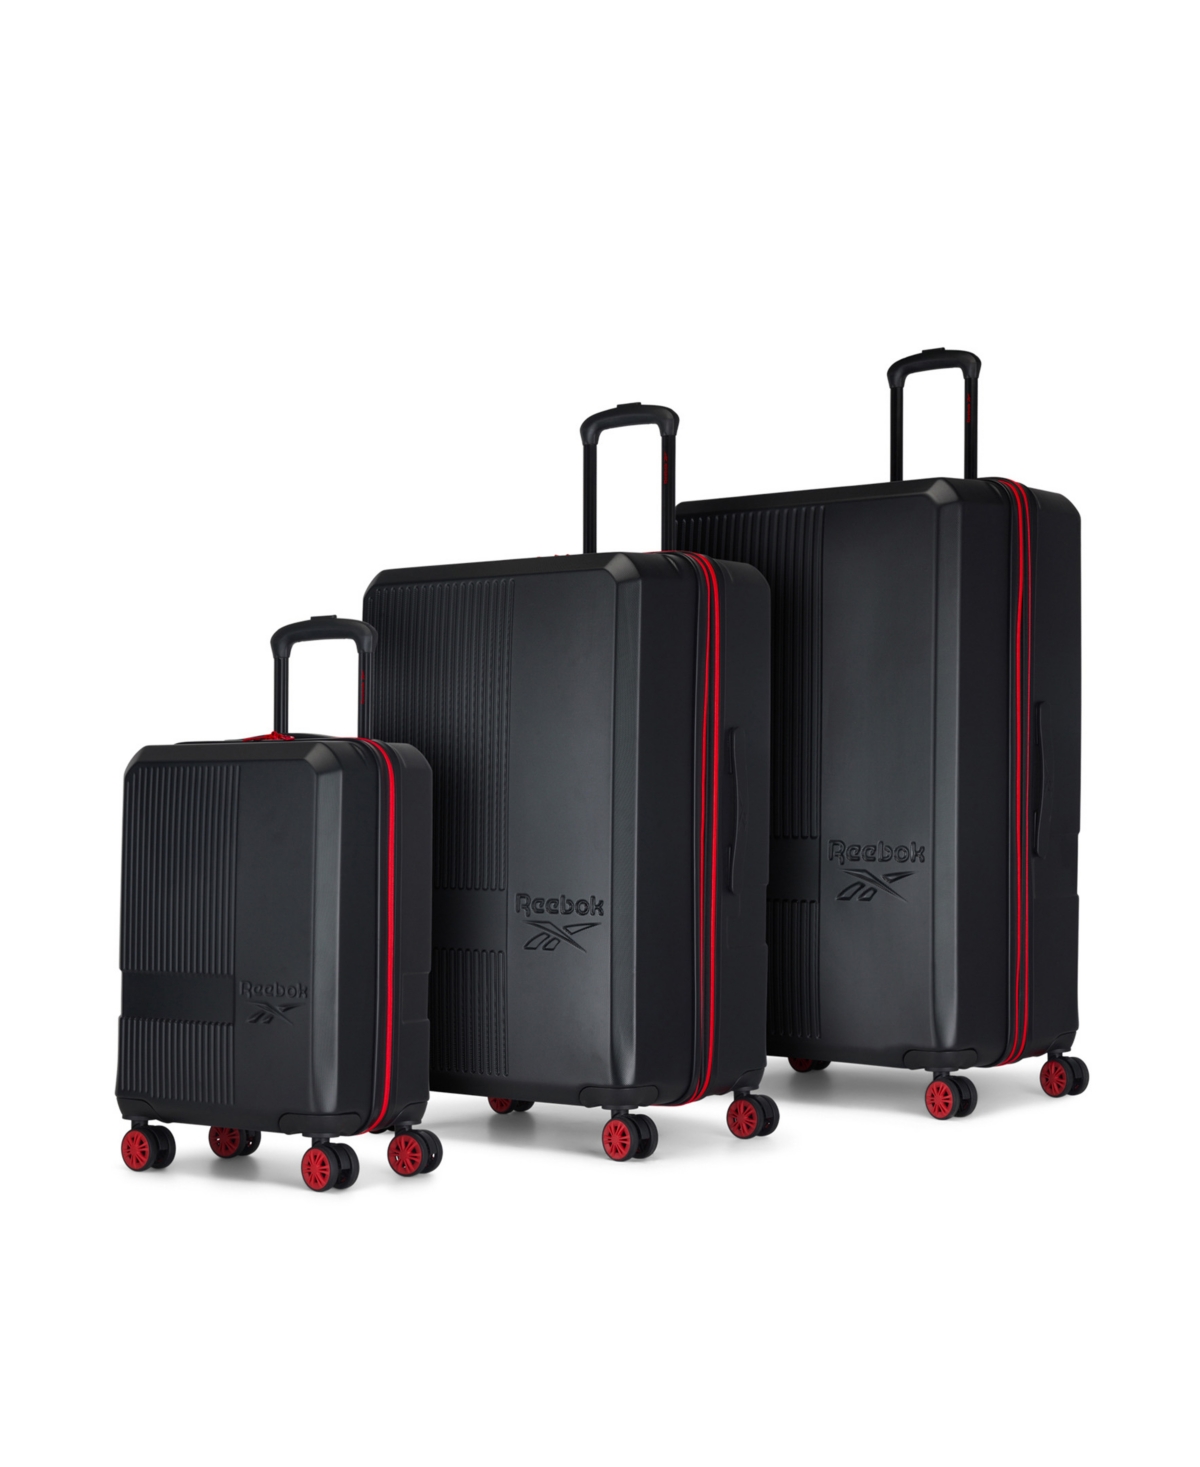 Jump Shot 3 Pieces 360-degree Spinner Luggage - Black